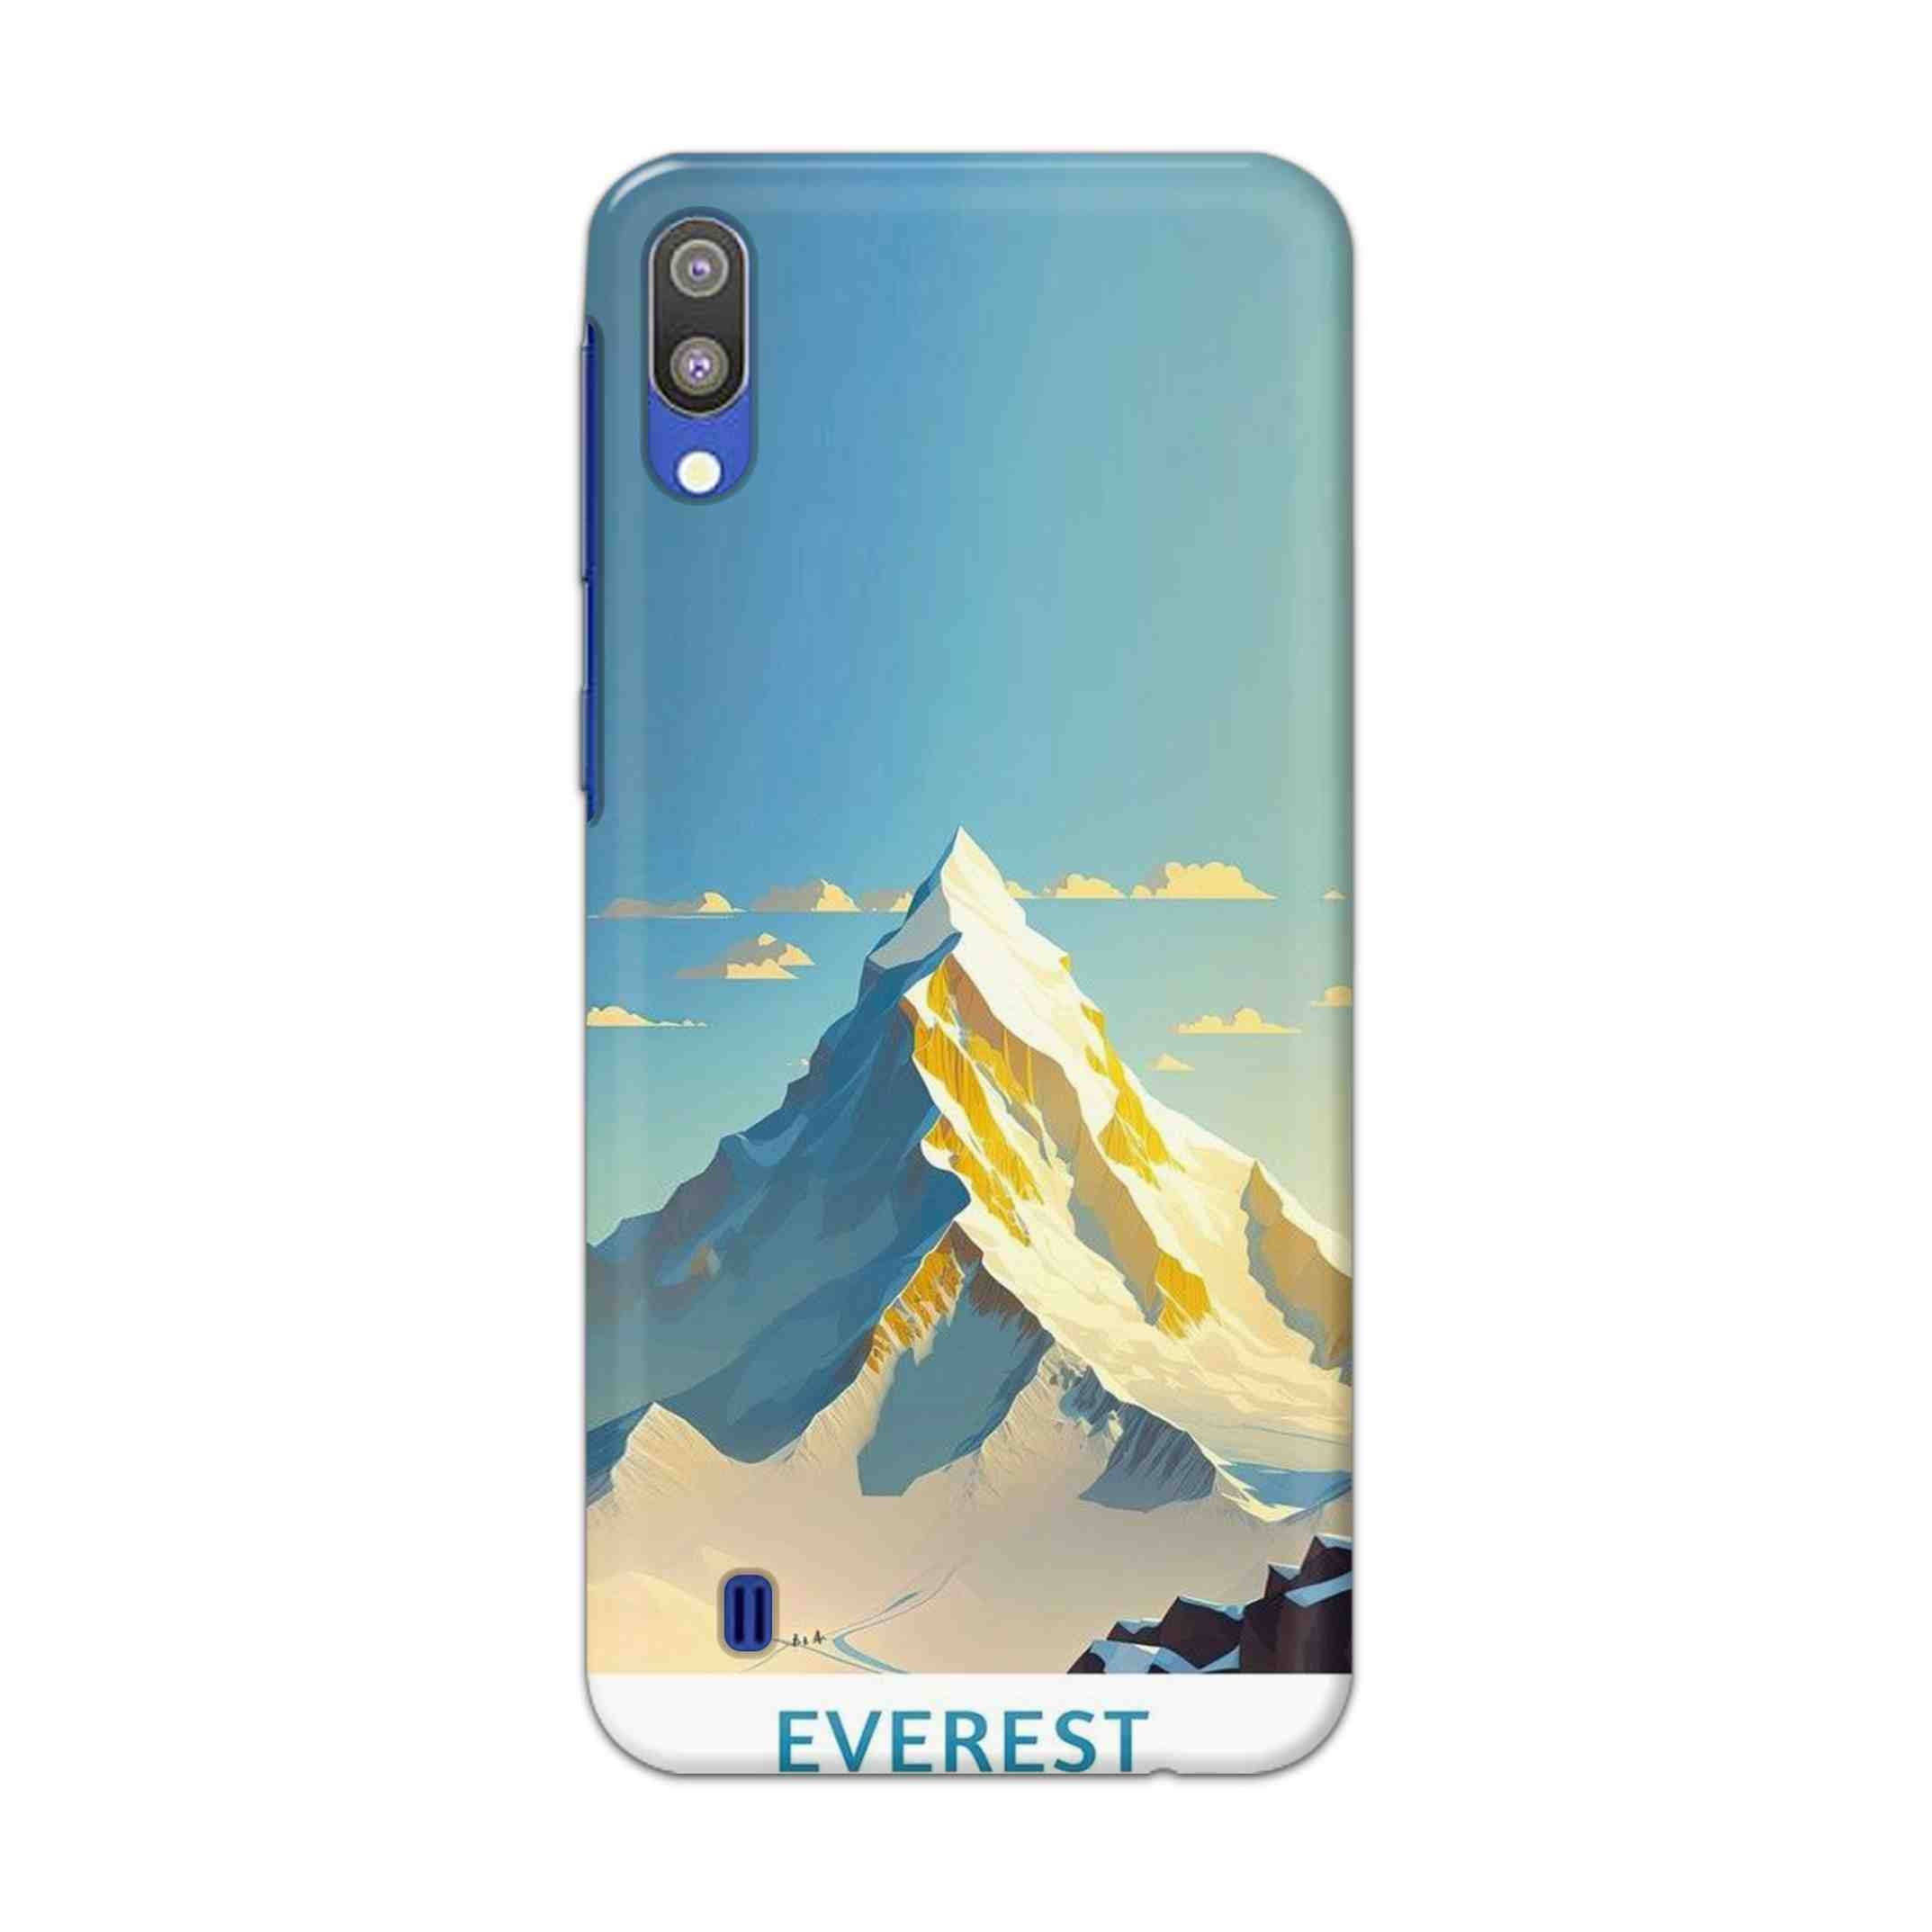 Buy Everest Hard Back Mobile Phone Case Cover For Samsung Galaxy M10 Online